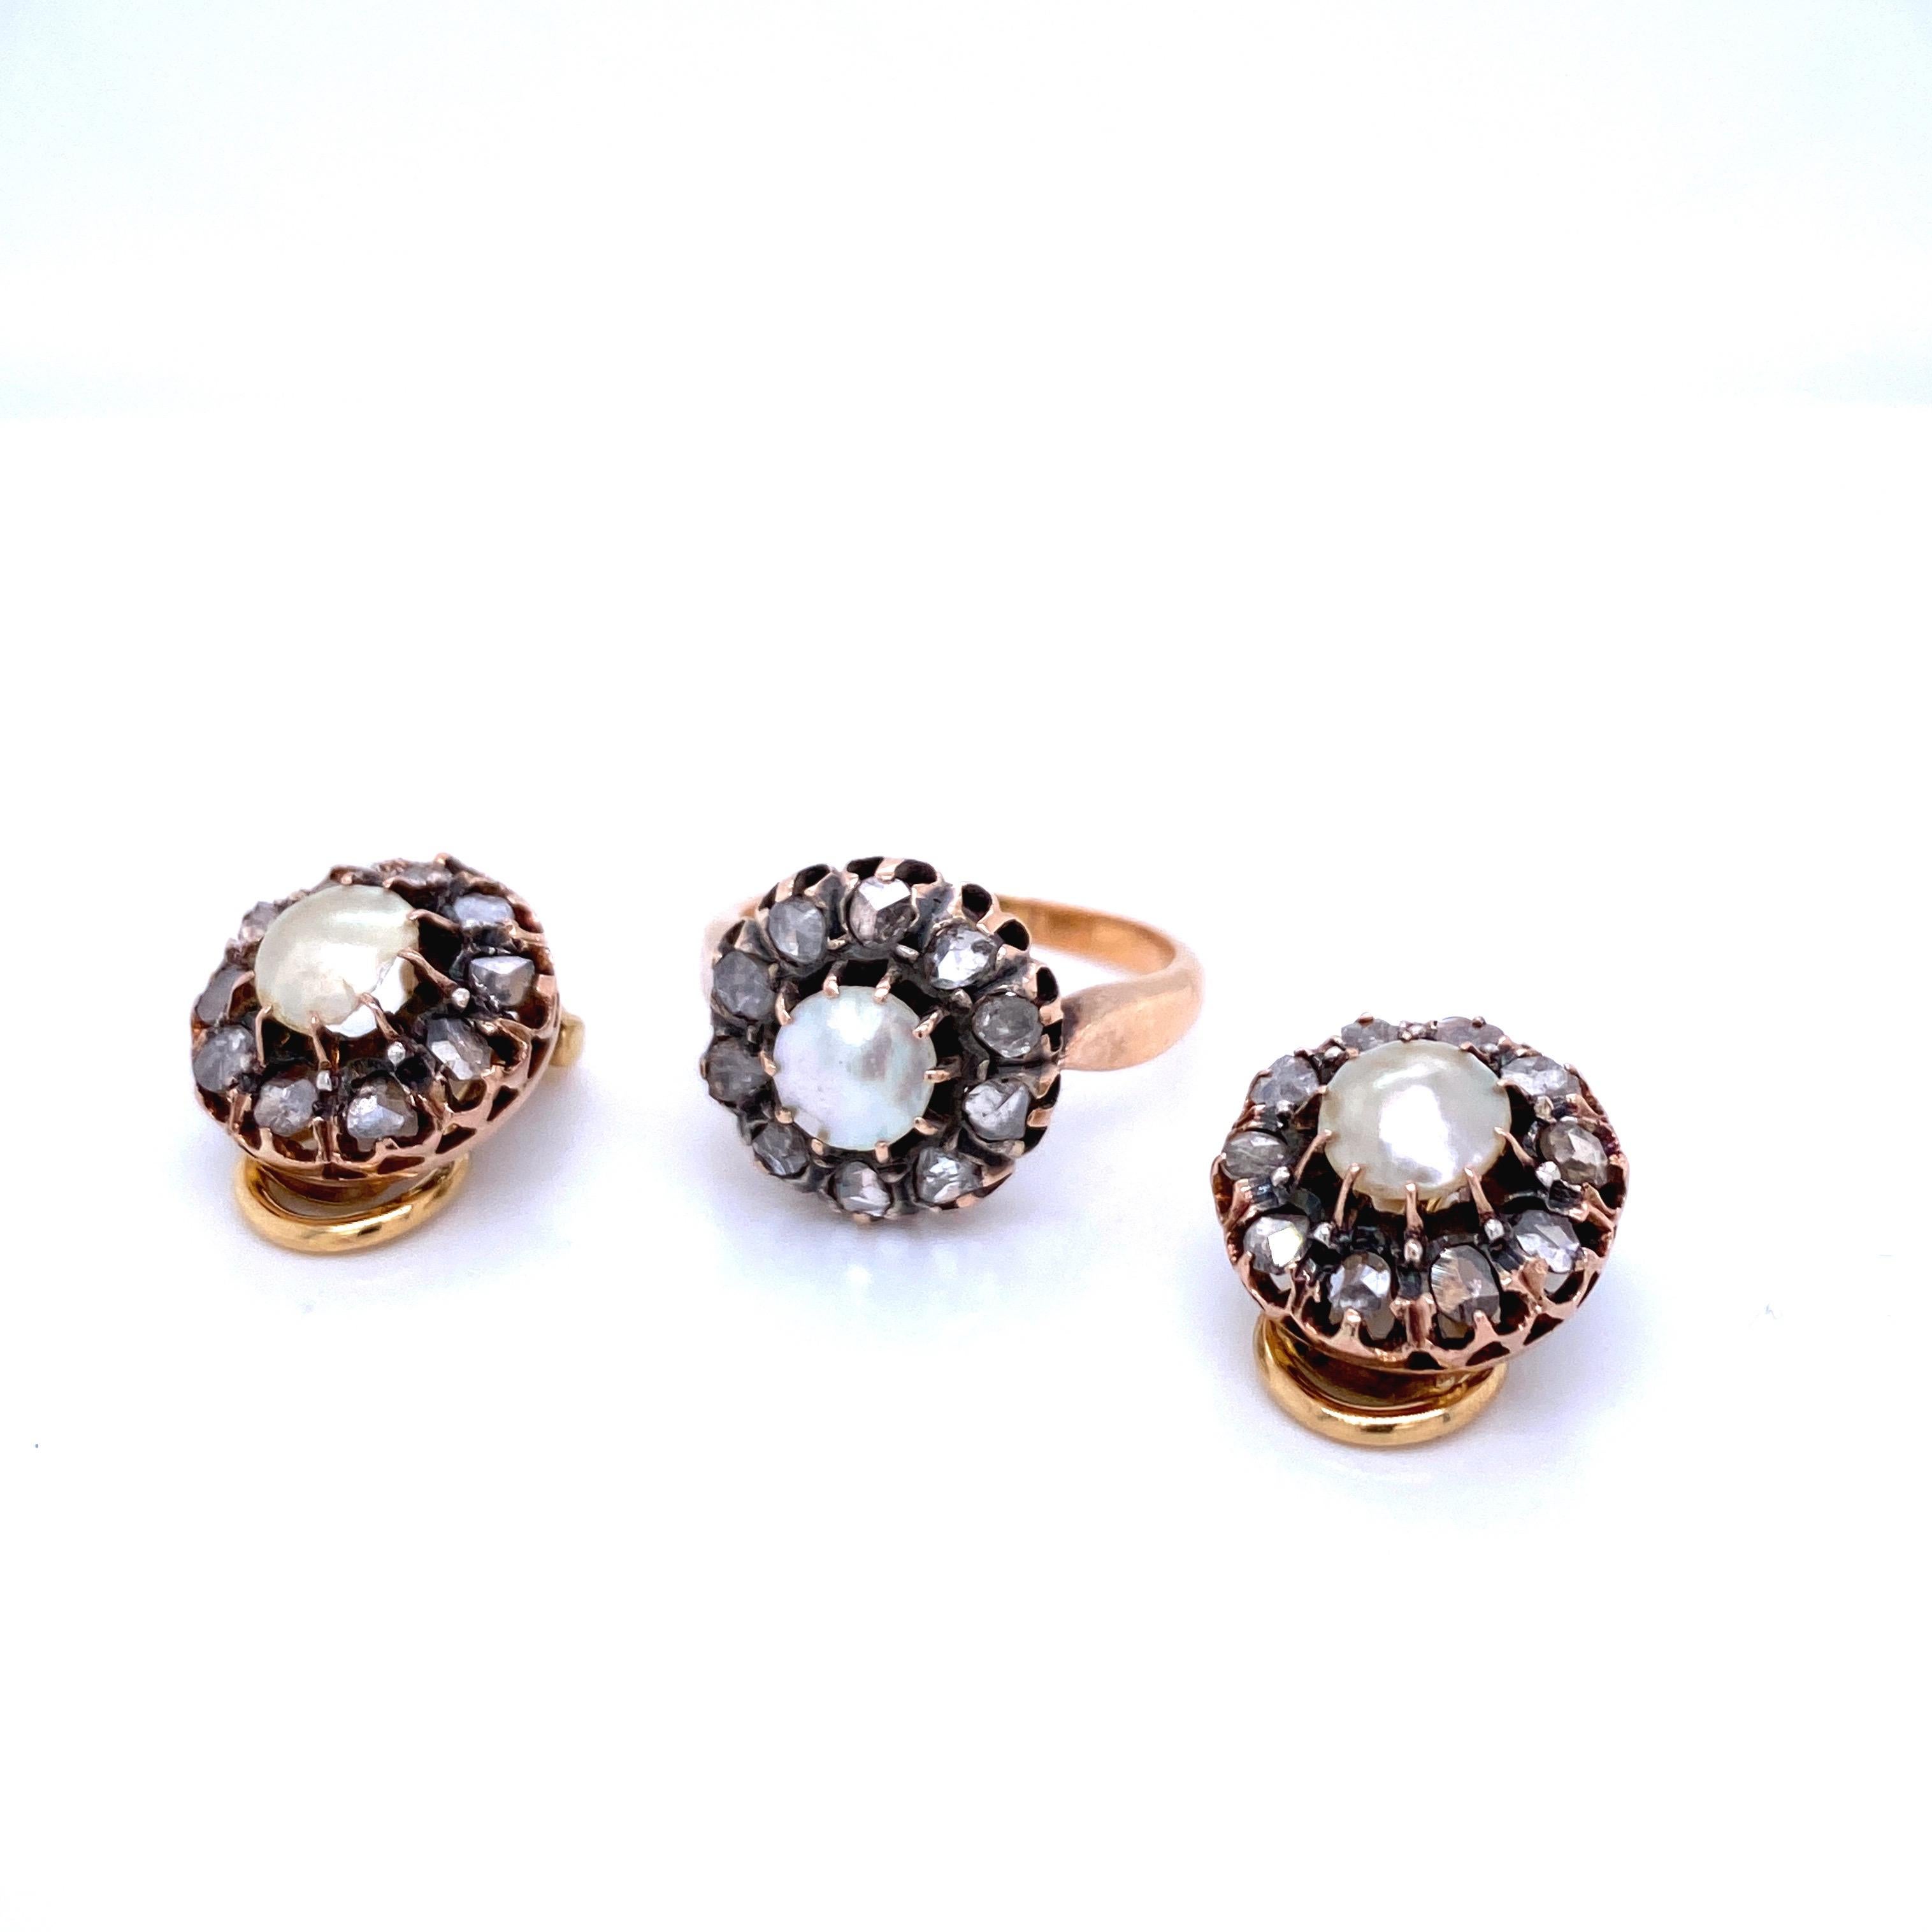 A gorgeous Victorian perfectly preserved suite, composed of clip-on earrings and ring, set with rose-cut diamonds and mother of pearls, mounted in 12k rose Gold. All handcrafted, Circa 1880

CONDITION: Pre-owned - Excellent 10/10
METAL: 12k Gold